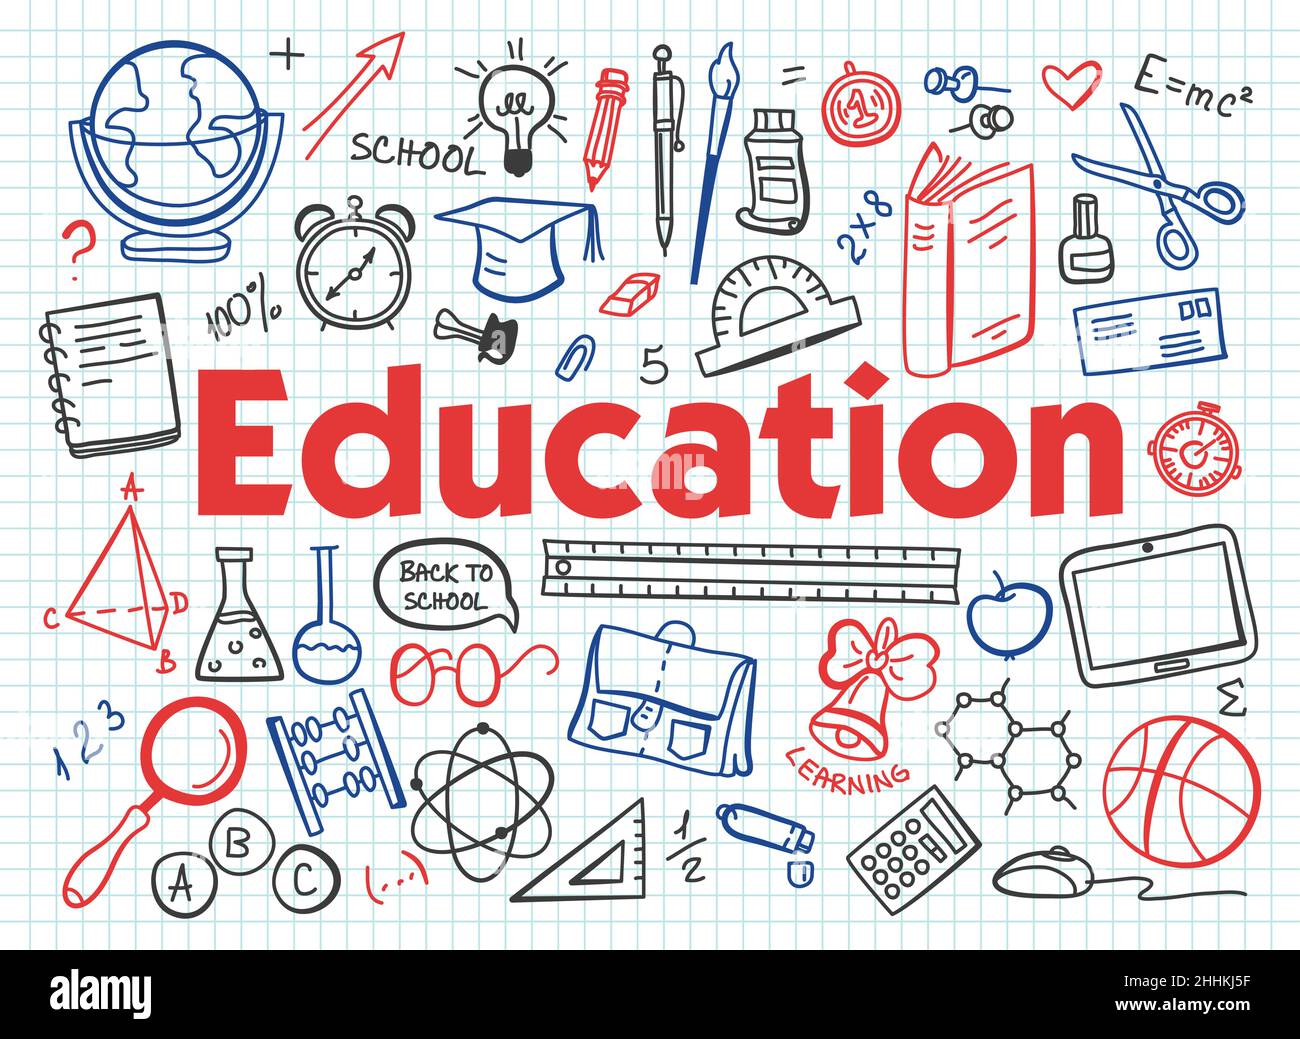 Hand drawn design vector illustration, set of education, education process, learning in educational institution and items of study equipment in doodle Stock Vector